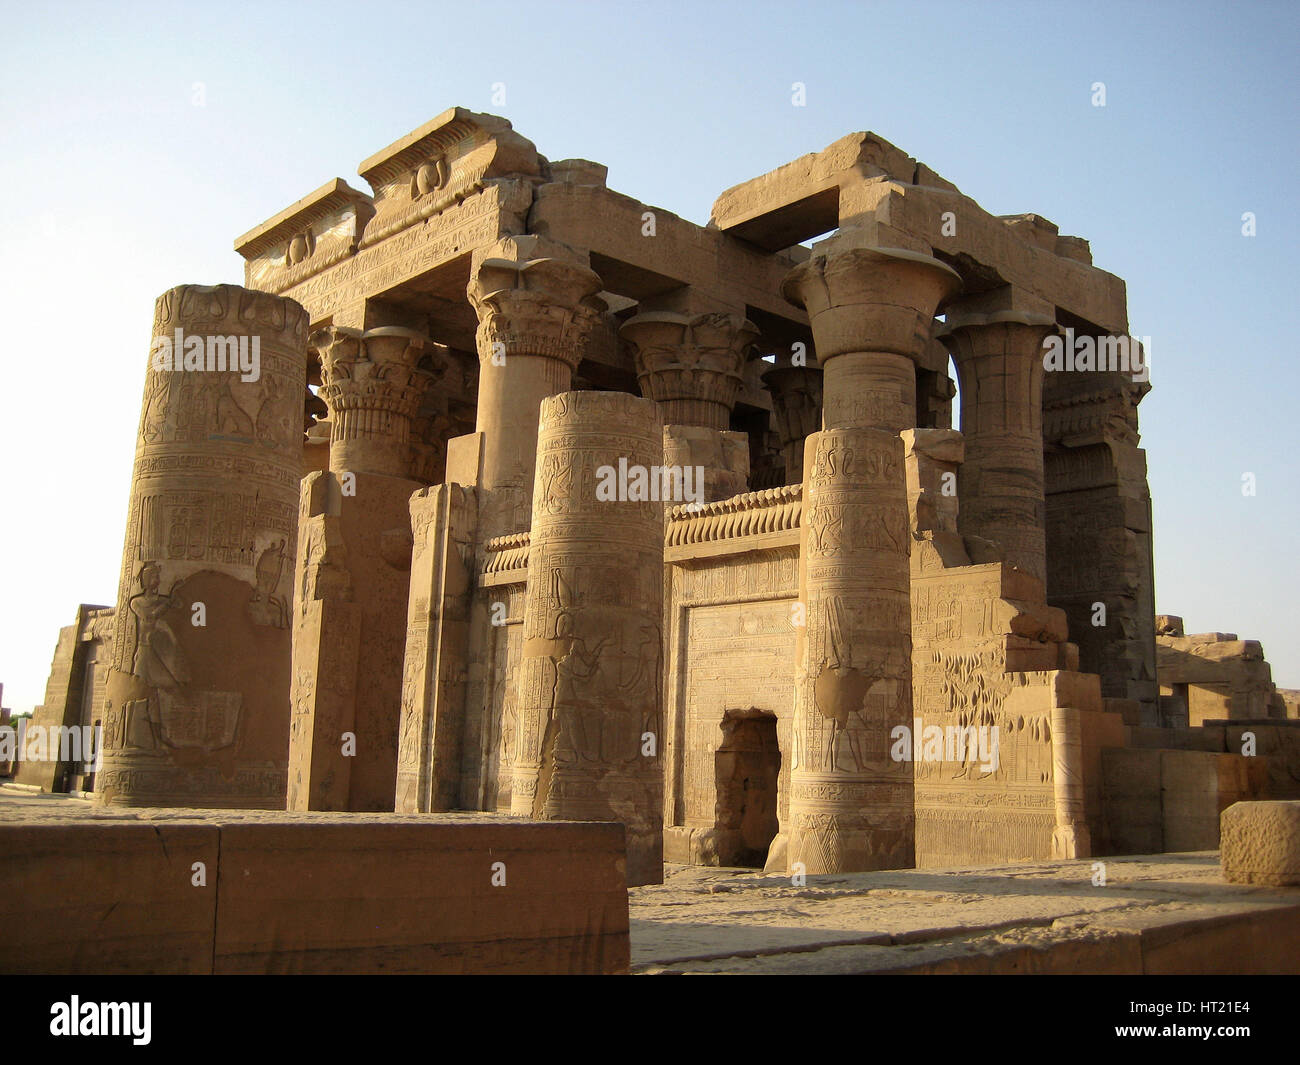 The double temple of Kom Ombo.The southern half was dedicated to Sobek, the crocodile god of fertili Artist: Werner Forman. Stock Photo